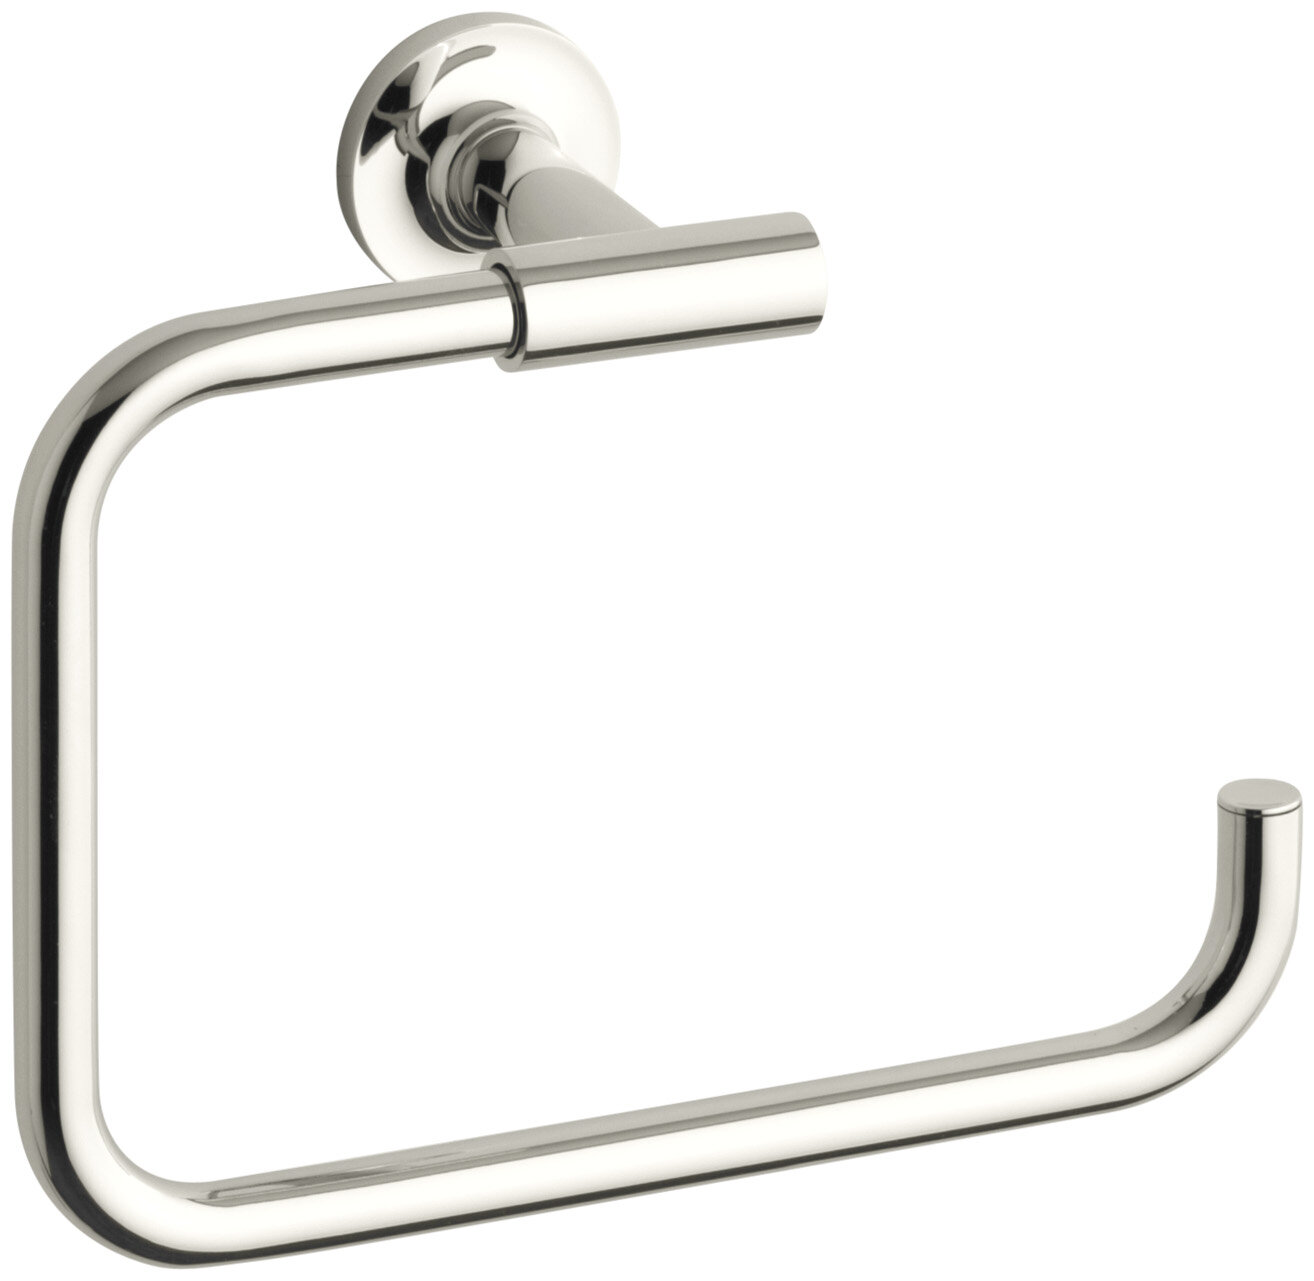 Vibrant Polished Nickel Kohler K-14441-SN Purist® Modern  Contemporary  Wall Mounted Towel Ring